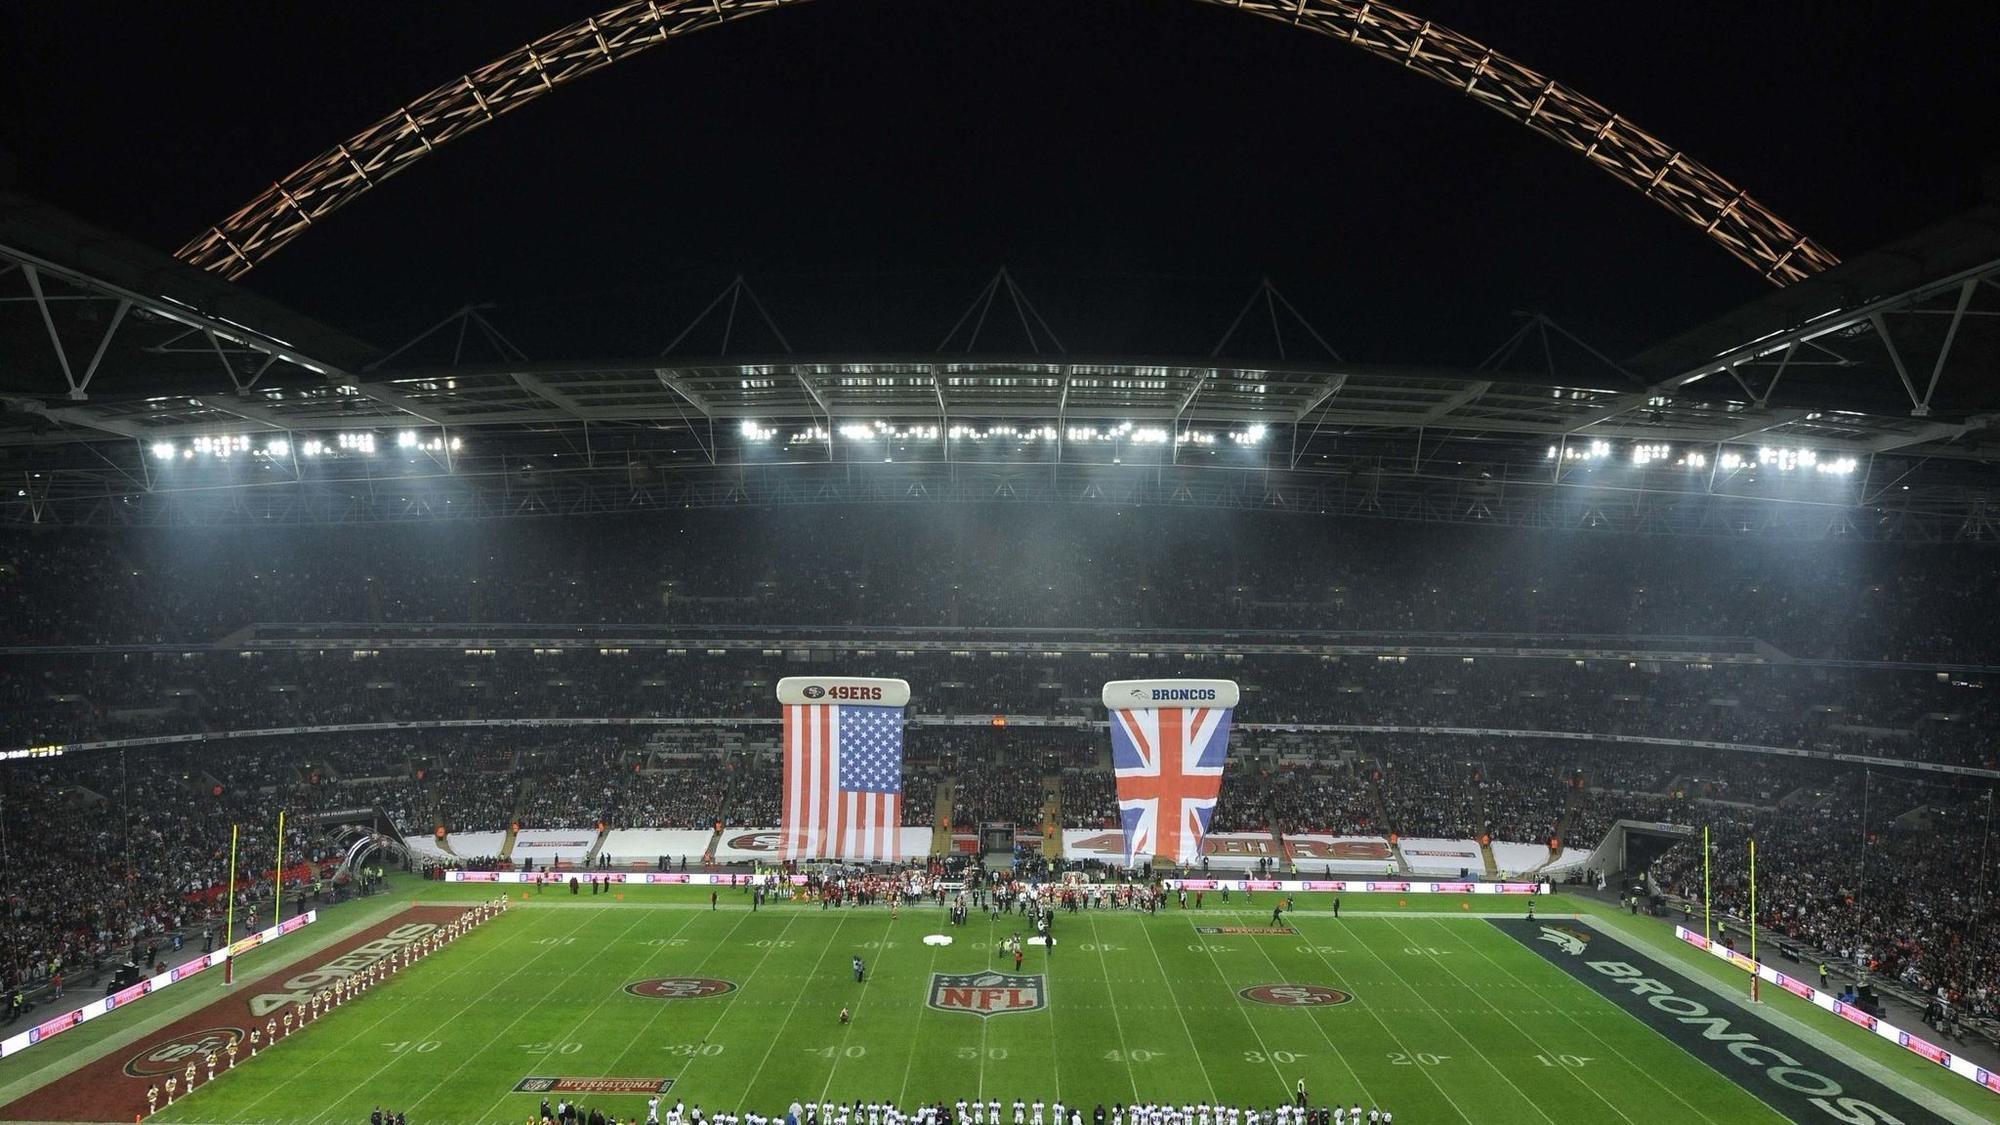 See the Philadelphia Eagles in Jolly Old England: How much are tickets, when do they go on sale?